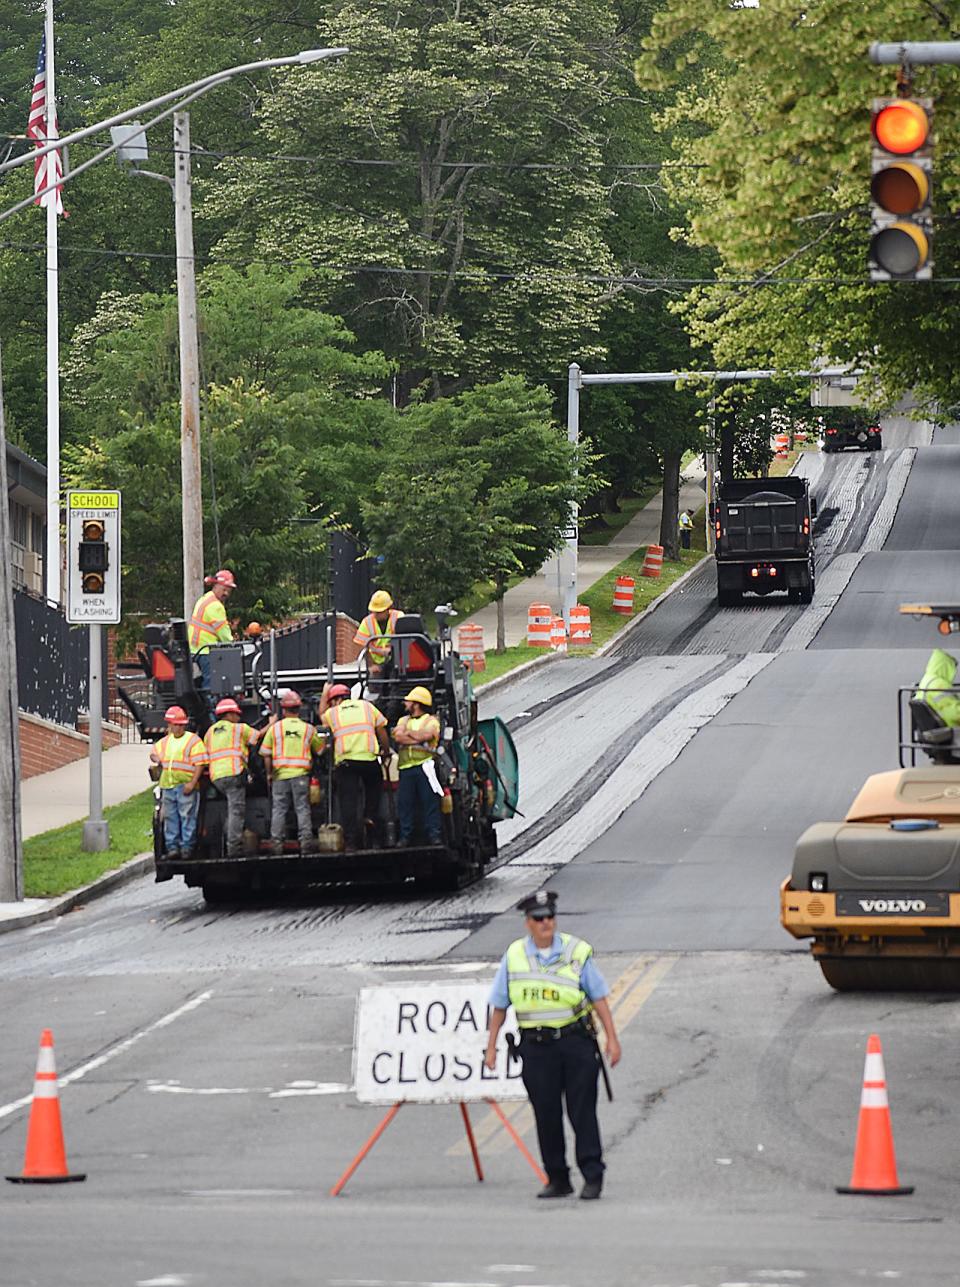 Road work on President Avenue recently tied up traffic. Fall River residents should expect more of the same, but the inconvenience is worth it for these necessary projects to be completed, said the city's engineer.